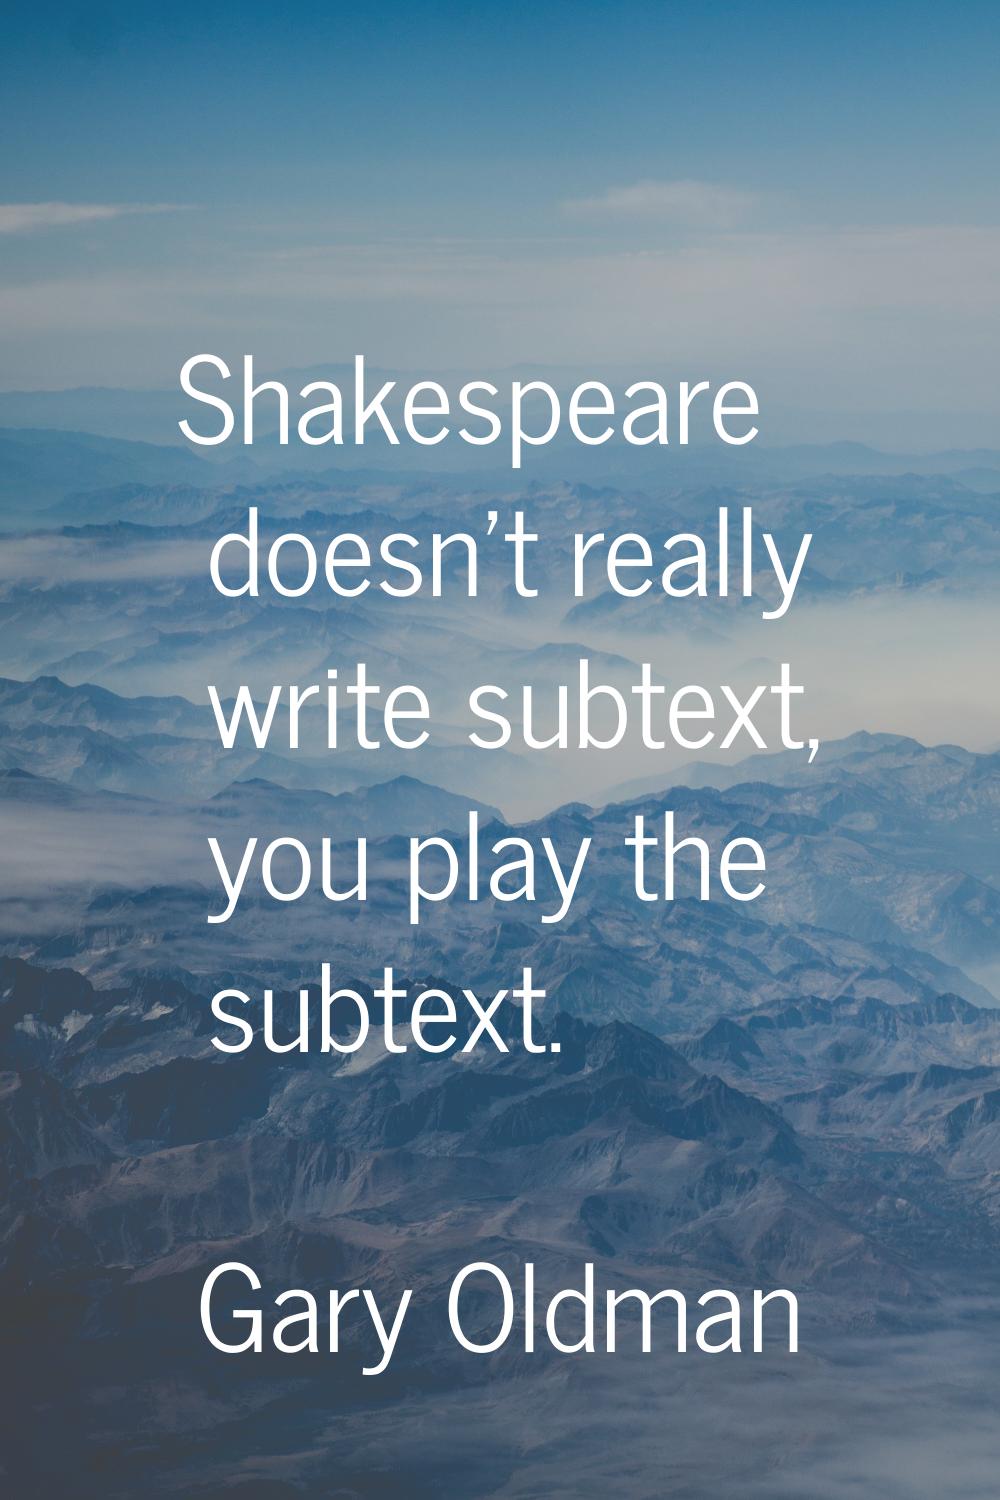 Shakespeare doesn't really write subtext, you play the subtext.